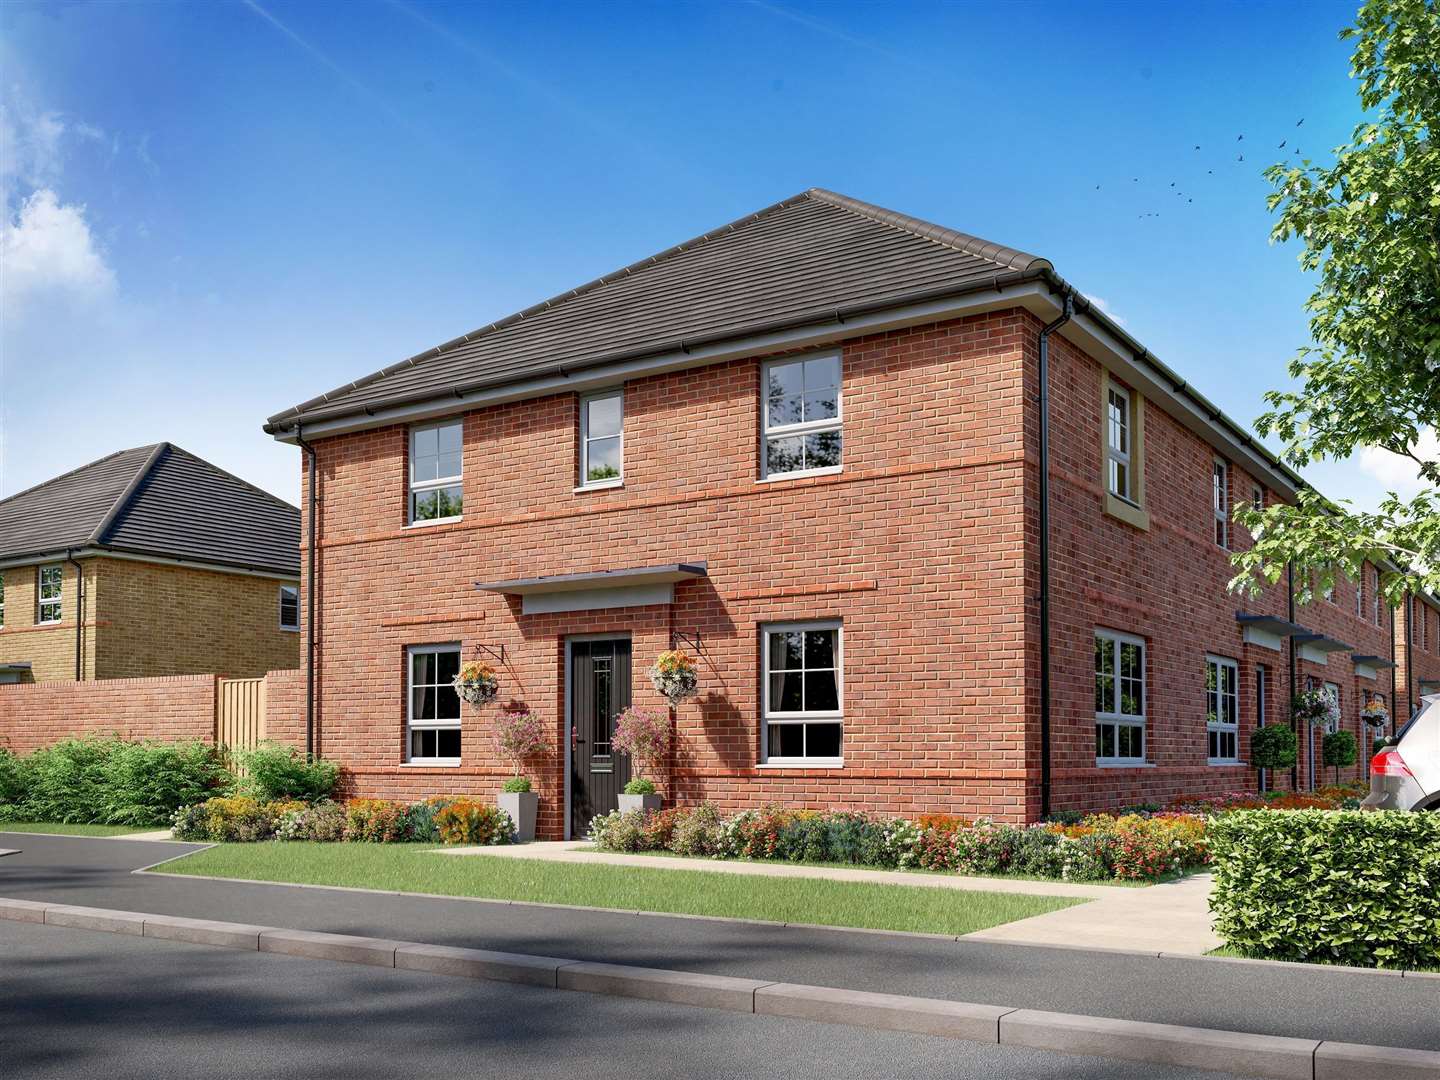 One of the new Moresby homes available at Richmond Park. Picture: Barratt Homes